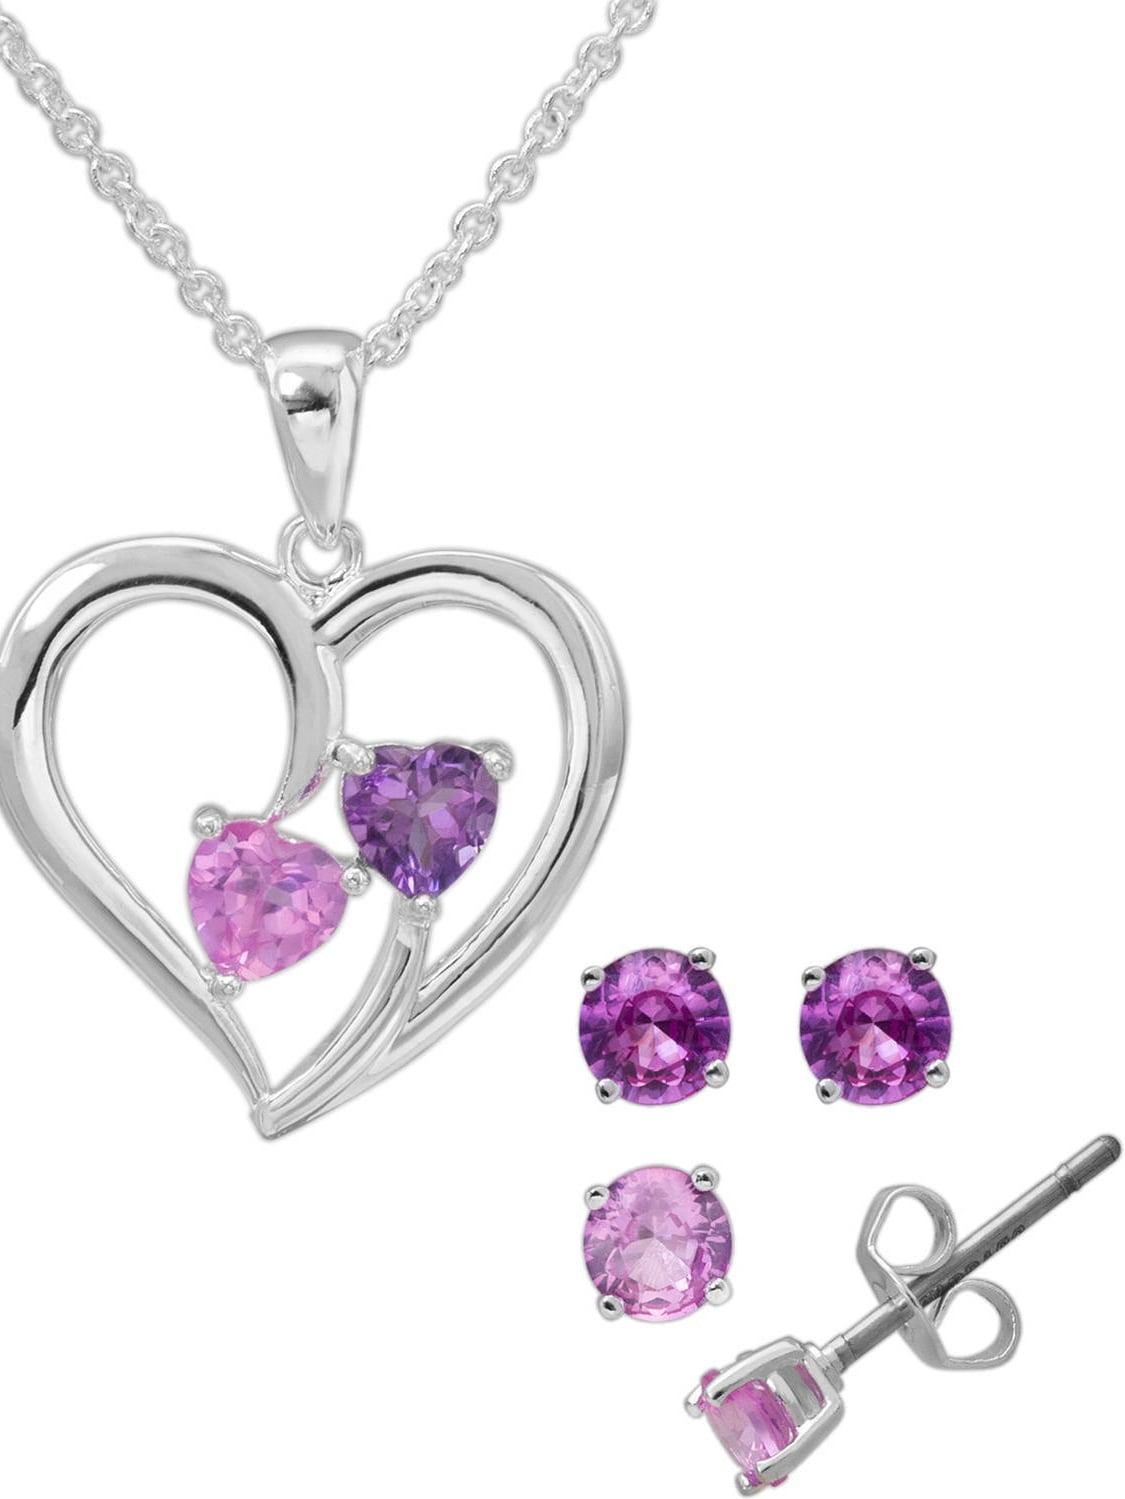 Crystal Silver-Plated Heart Pendant and Stud Earring Set - Walmart.com